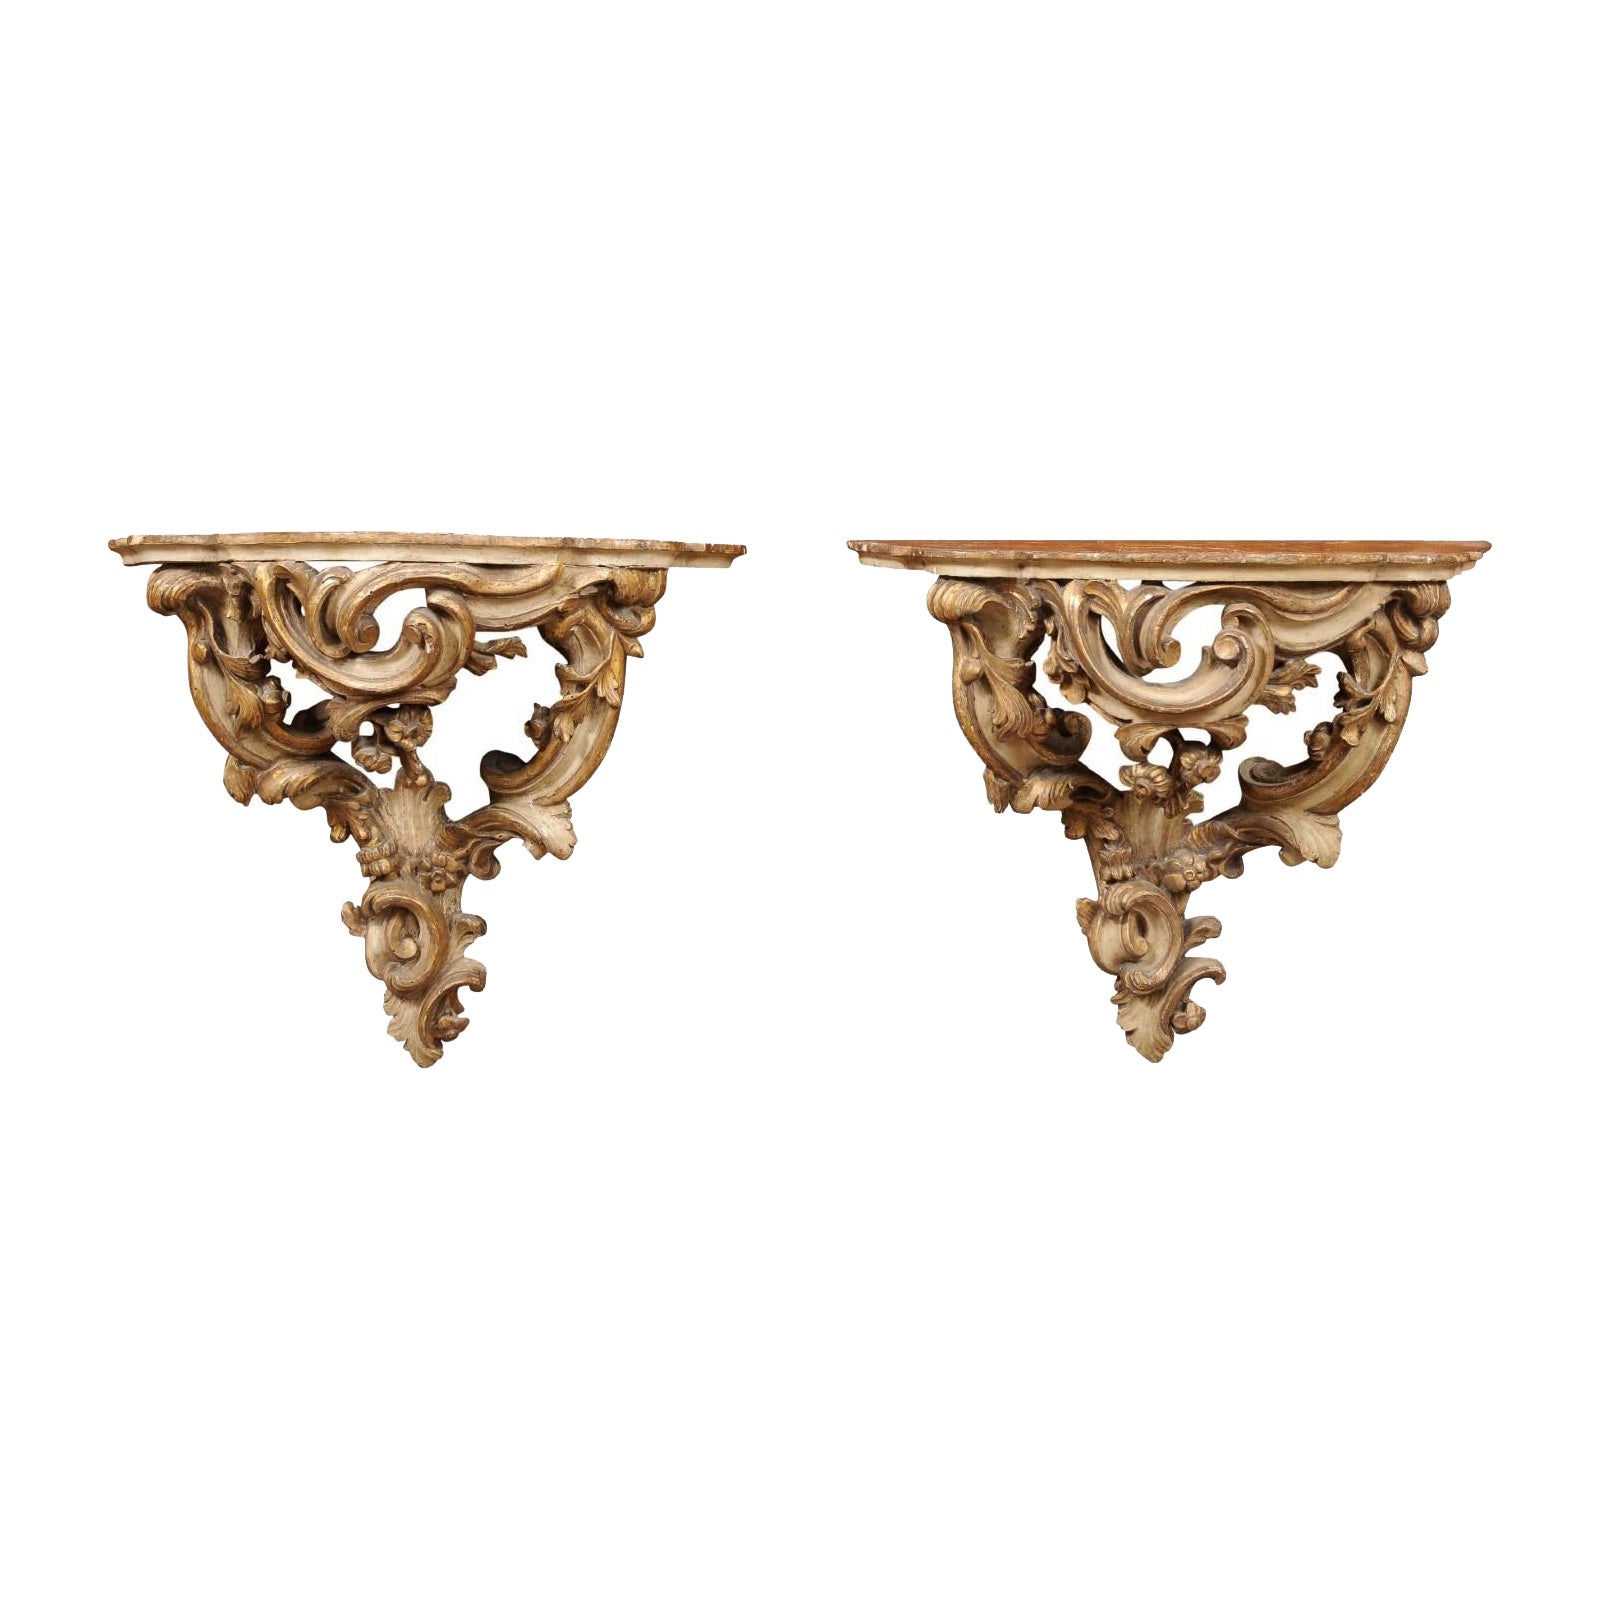  Pair of Large Louis XV Style Painted Wall Brackets, 19th Century France For Sale